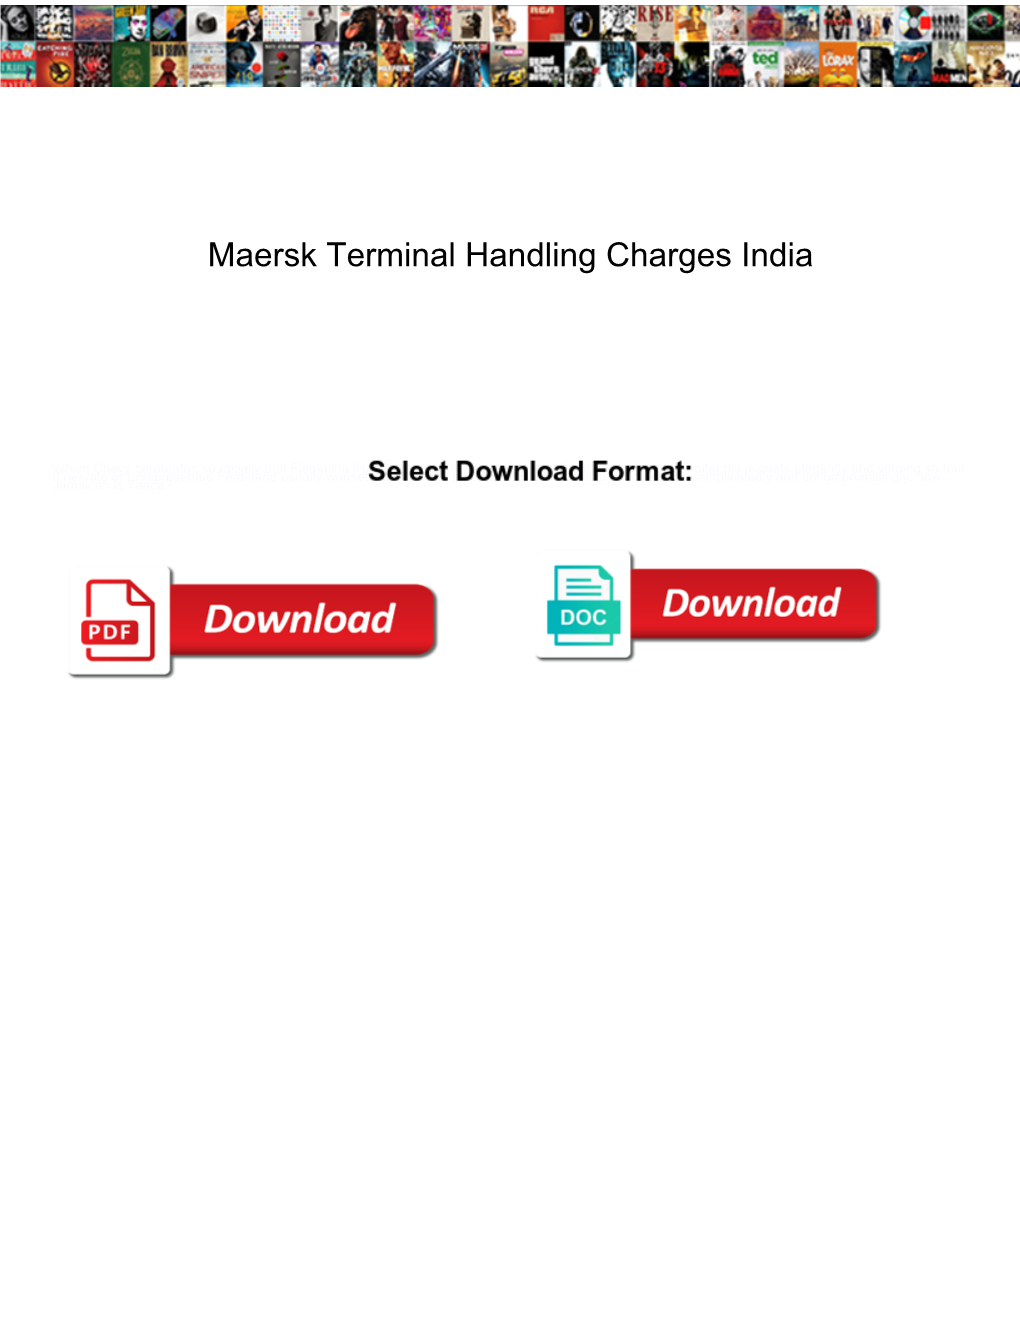 Maersk Terminal Handling Charges India